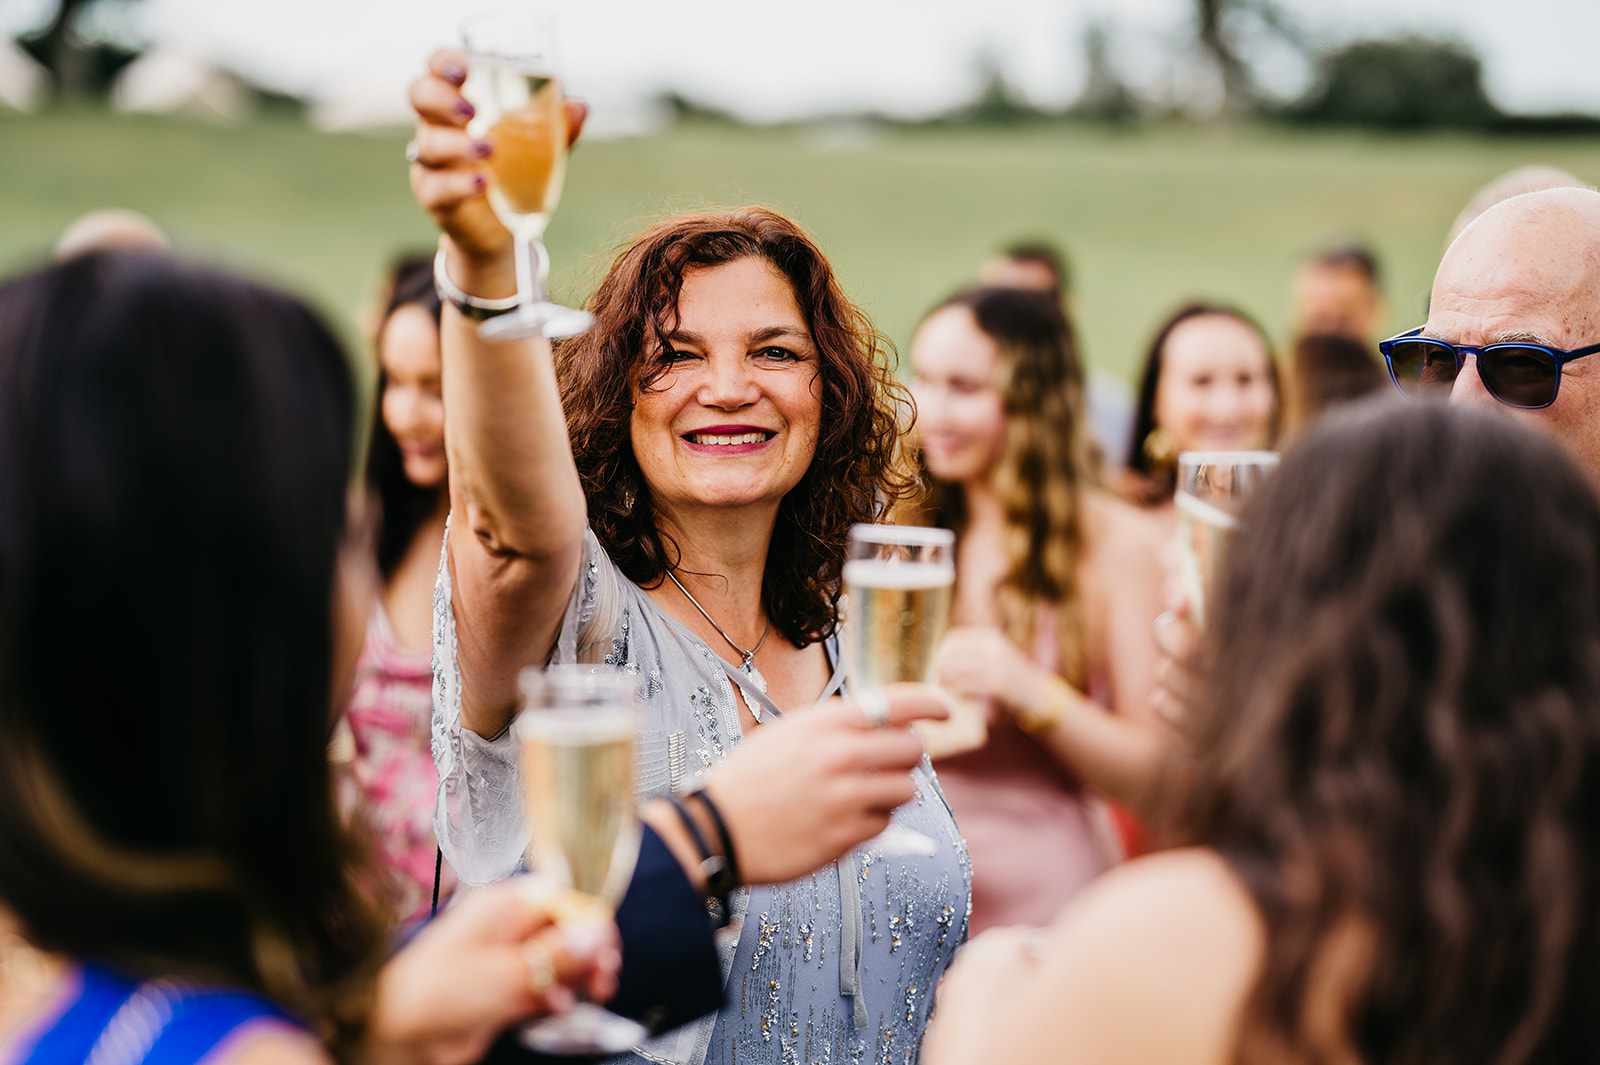 wedding guest celebrates with champagne